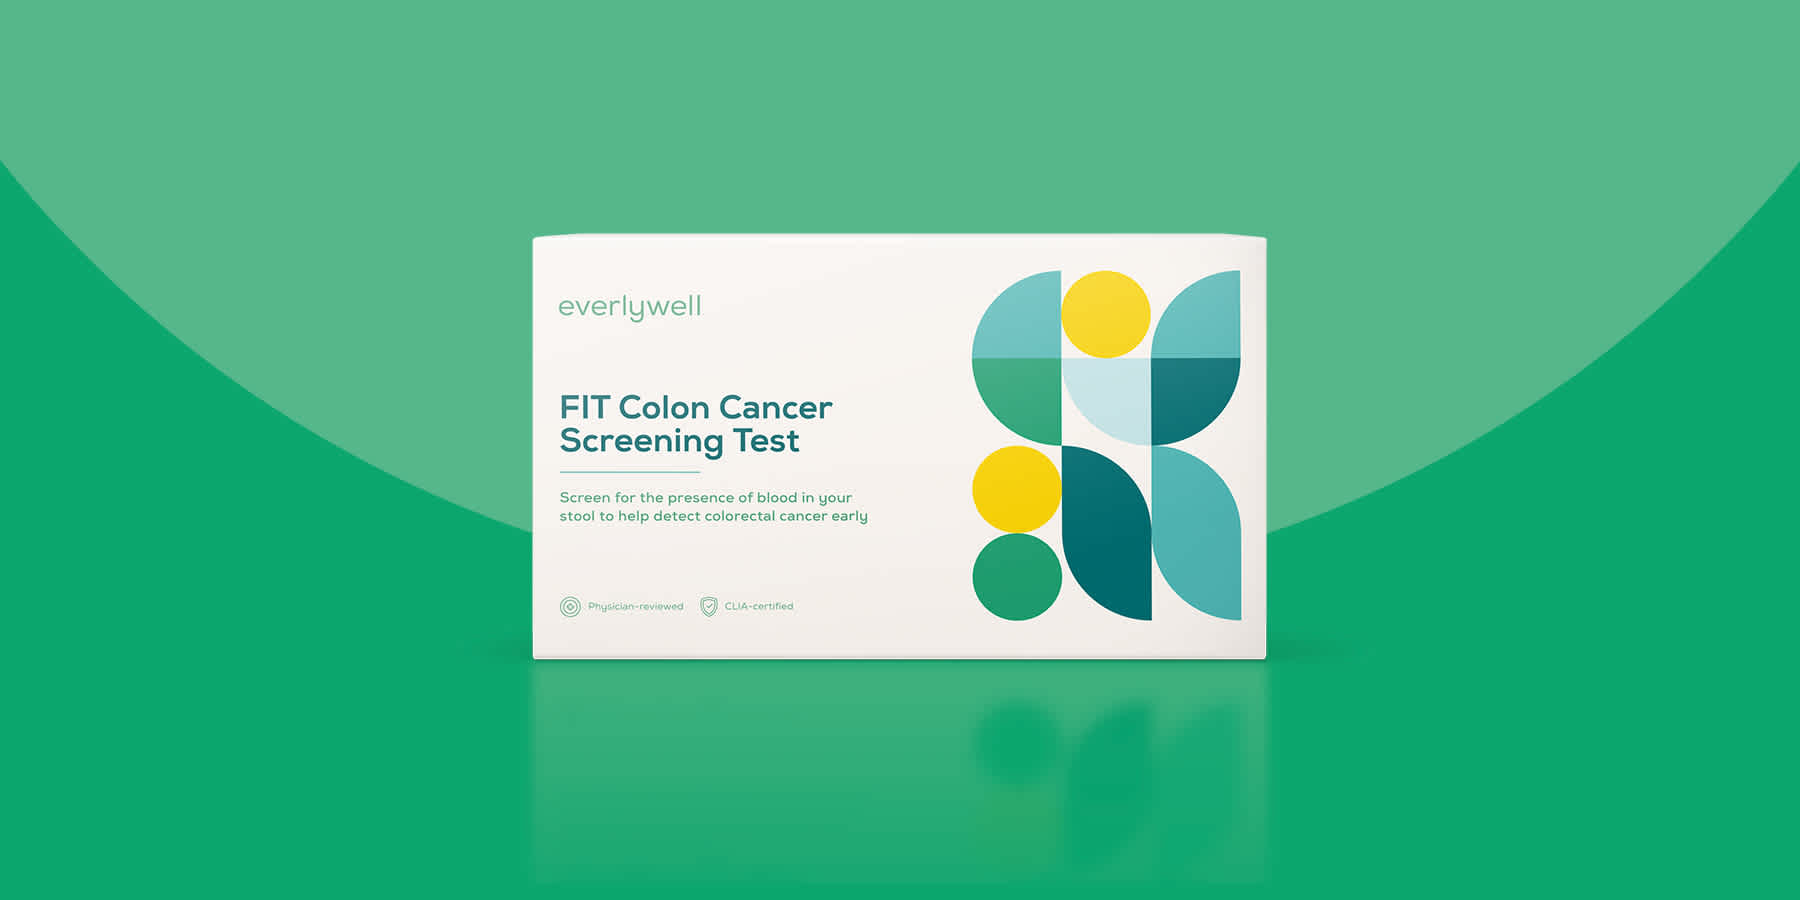 FIT Colon Cancer Screening Test kit for routine colon cancer screening, against a green background